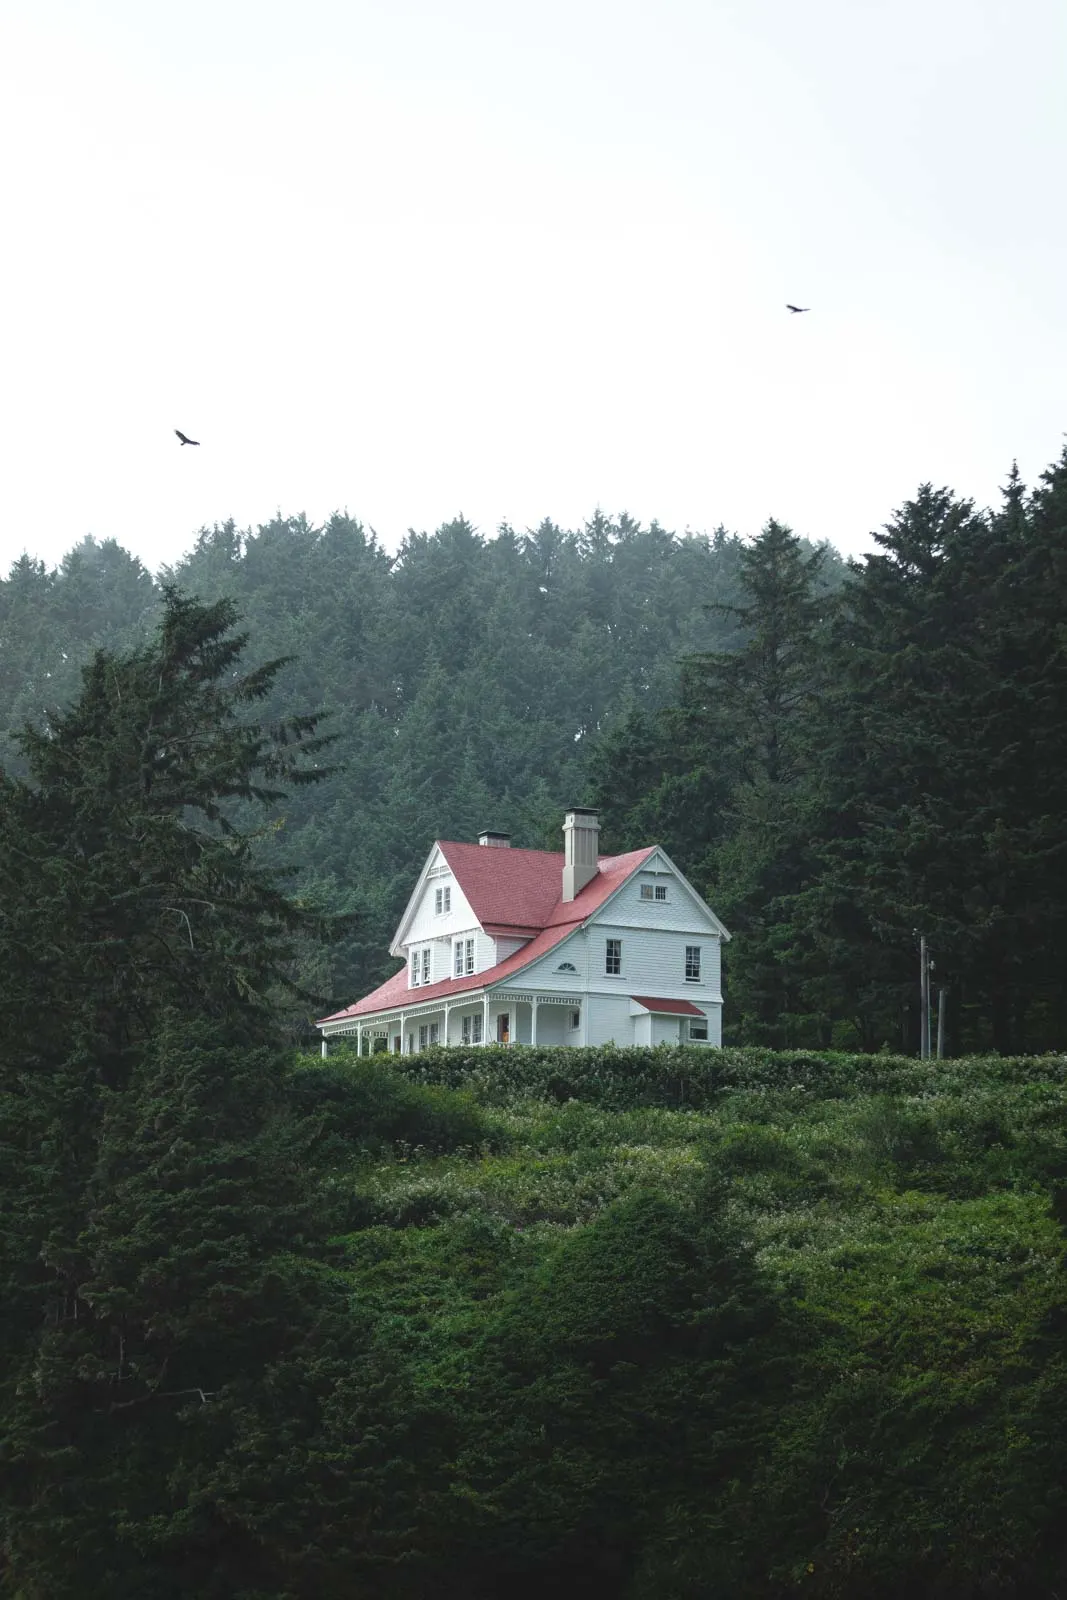 View of Heceta Lighthouse Keeper's House turned into a bed & breakfast hotel surrounded by trees.